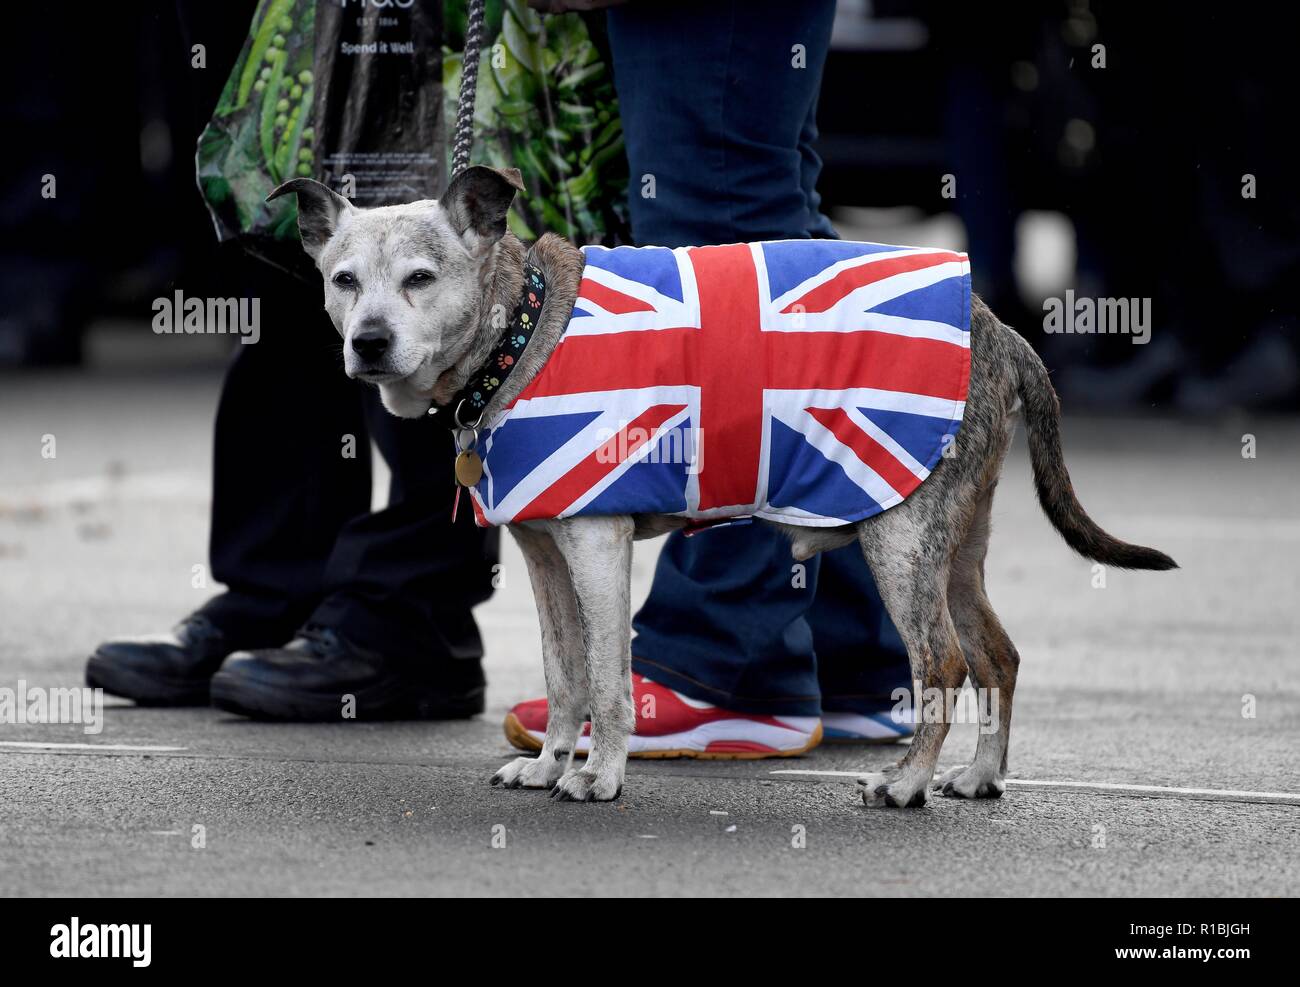 Weymouth, Dorset, UK. 11th Nov, 2018. Remembrance Sunday service and parade in Weymouth, Dorset, UK. A dog in a Union Jack coat Credit: Finnbarr Webster/Alamy Live News Stock Photo